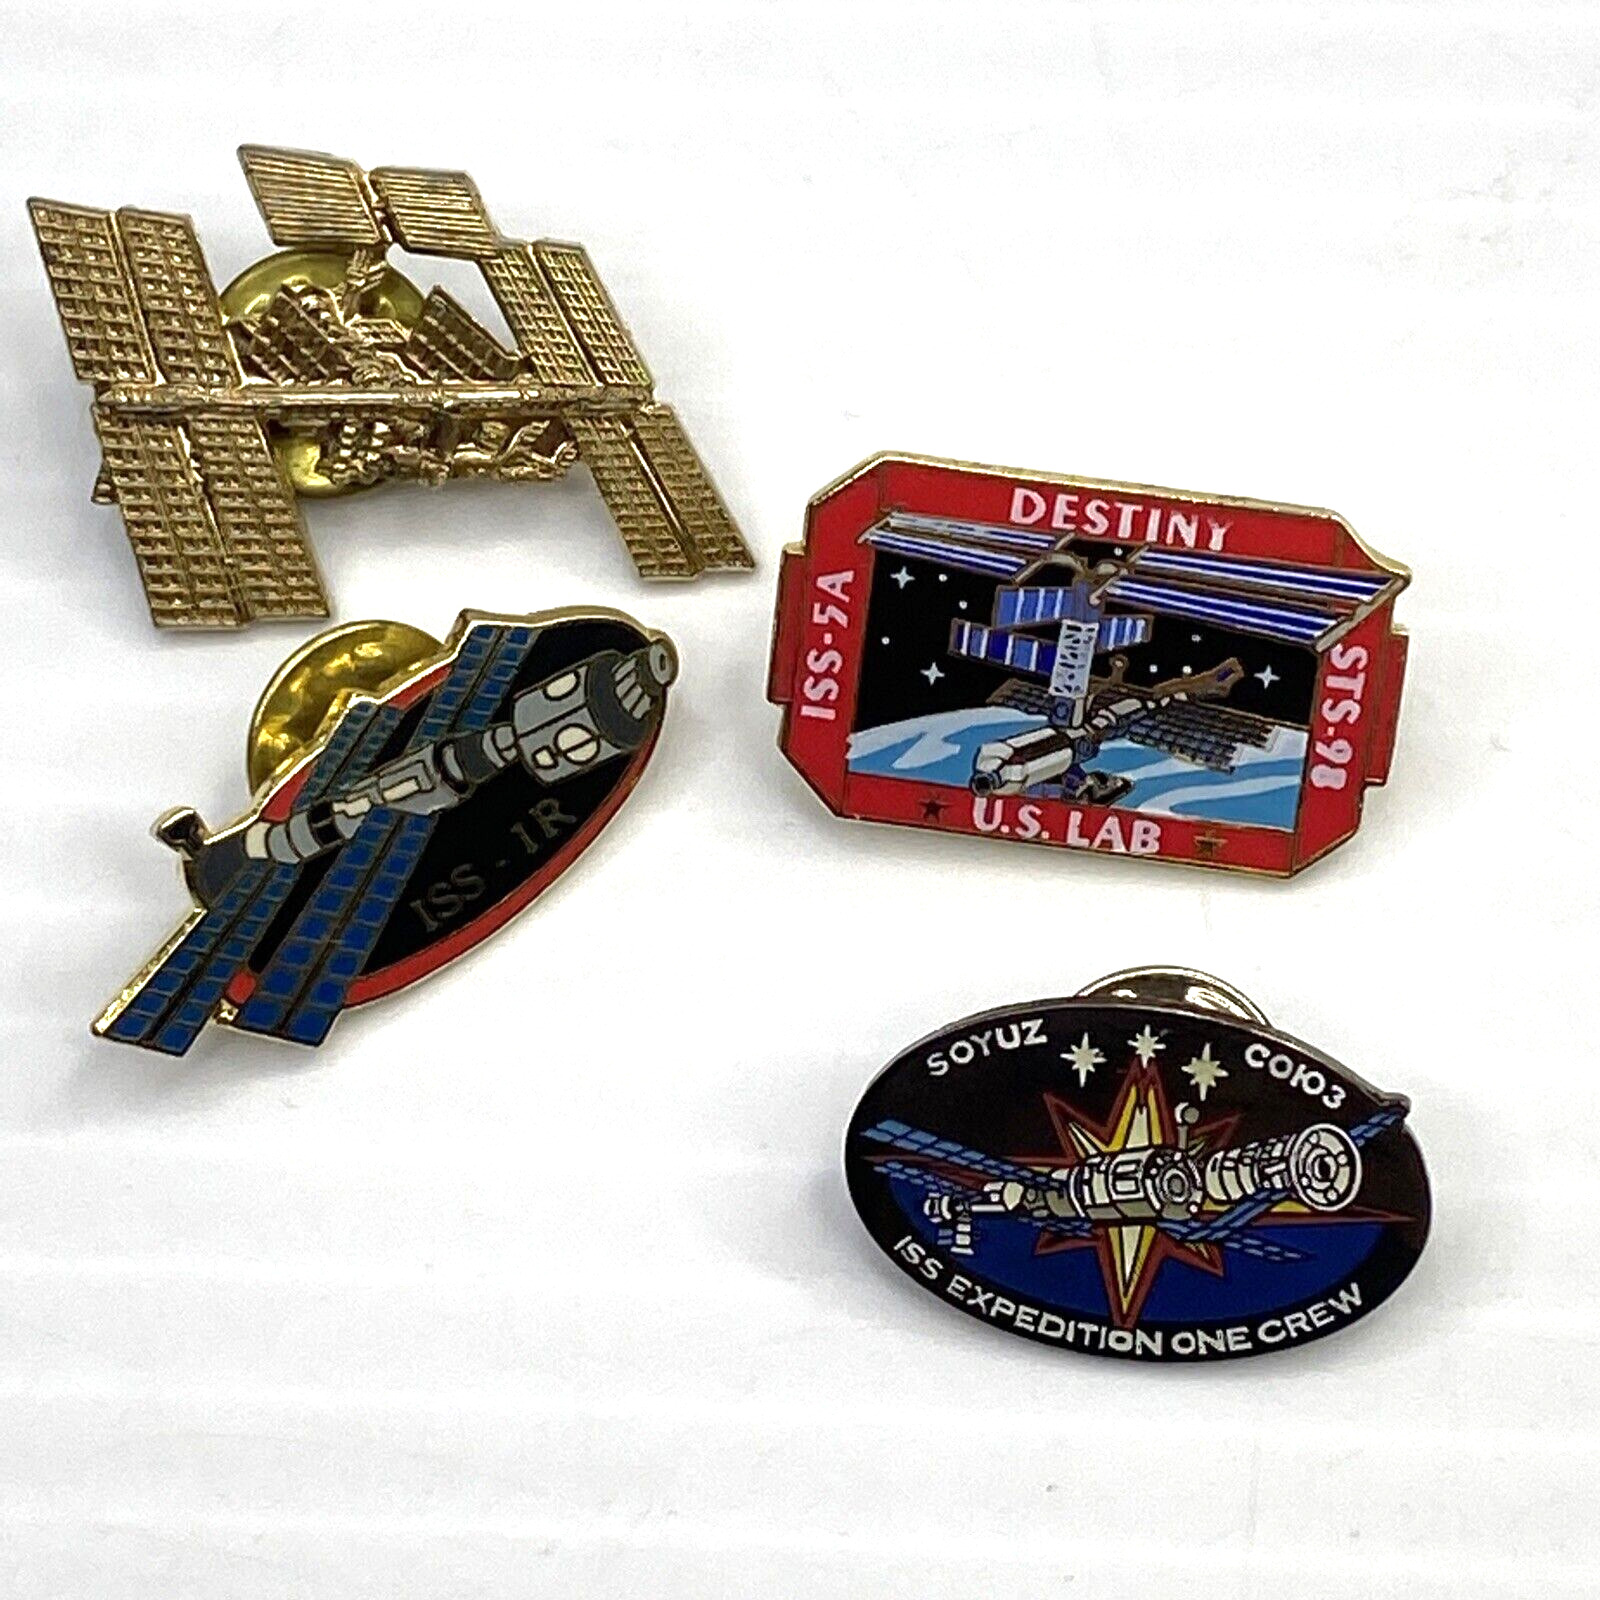 ISS 1R, US Lab Destiny 5a, Soyuz Expedition One Crew Set of 4 Pin Backs Space